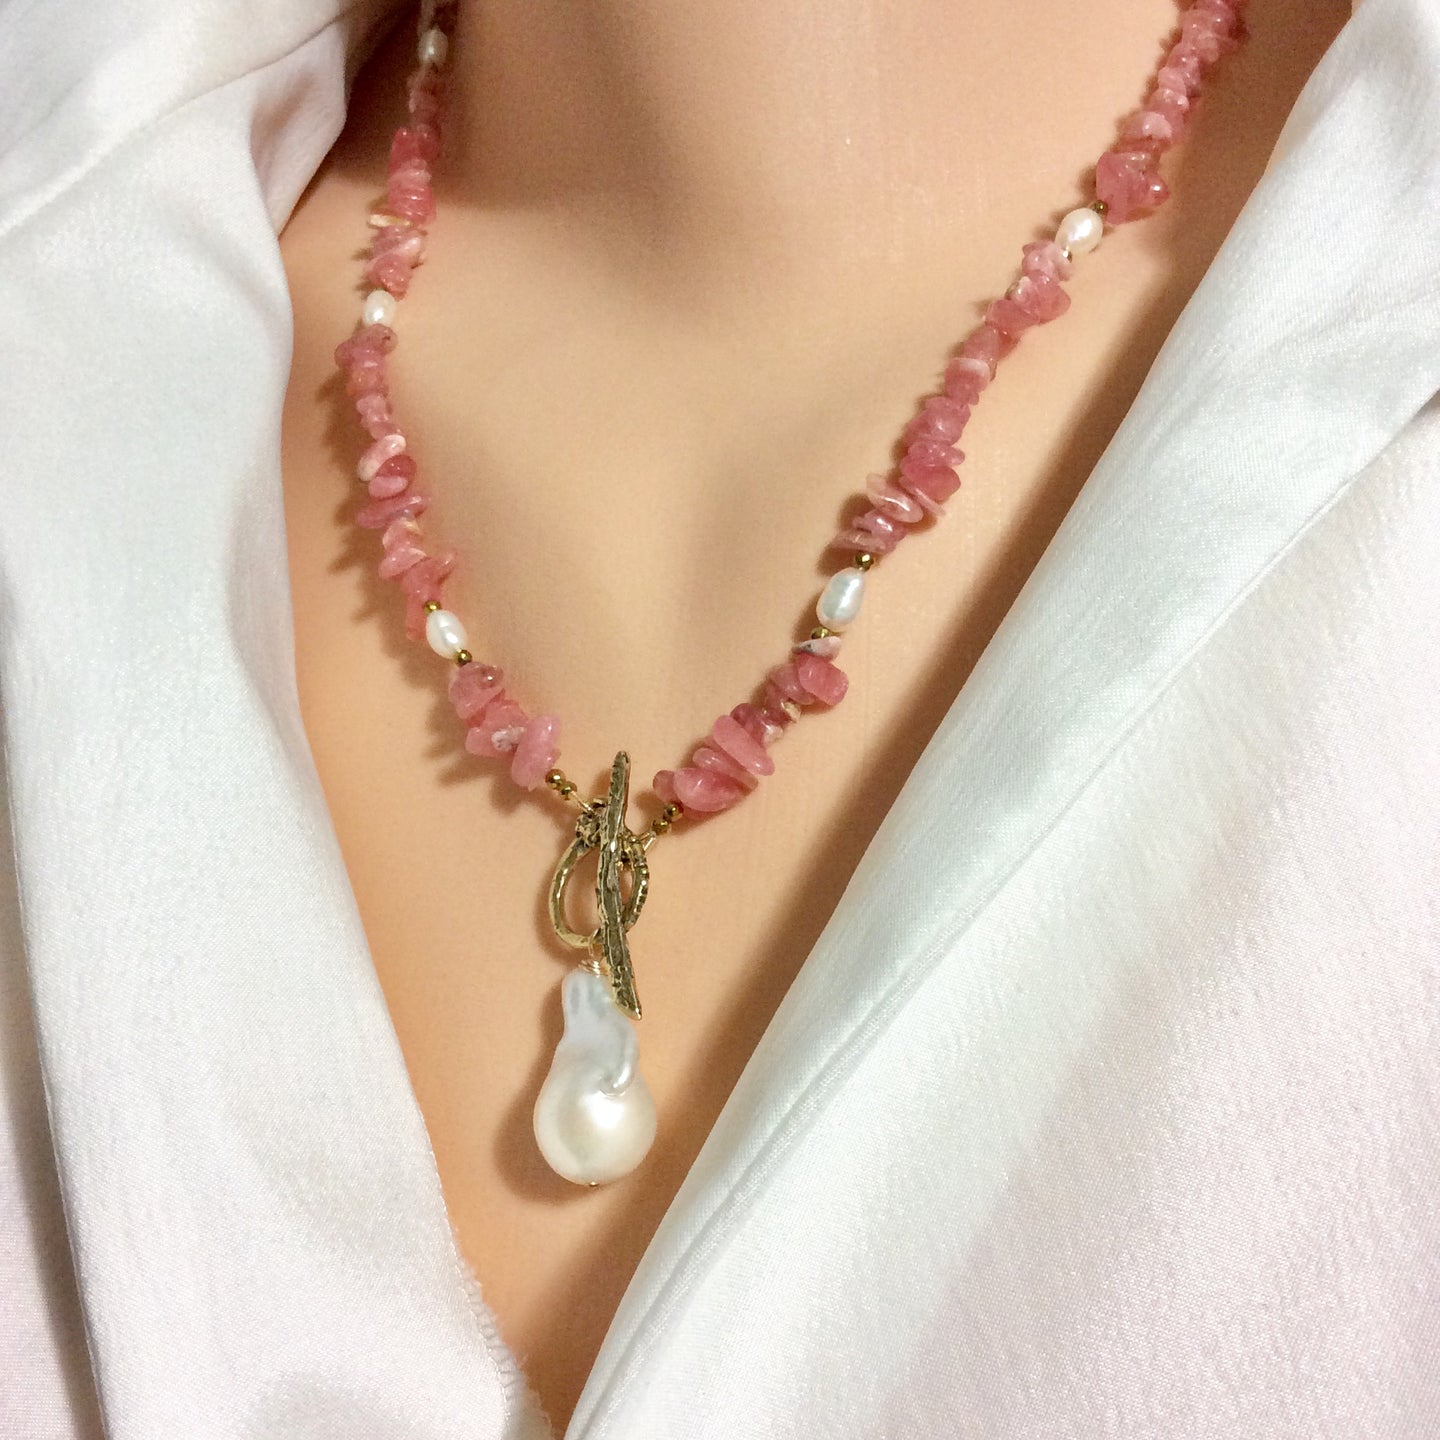 Rhodochrosite Beaded Necklace w Natural Pearls and Gold Bronze Artisan Toggle Clasp & Details